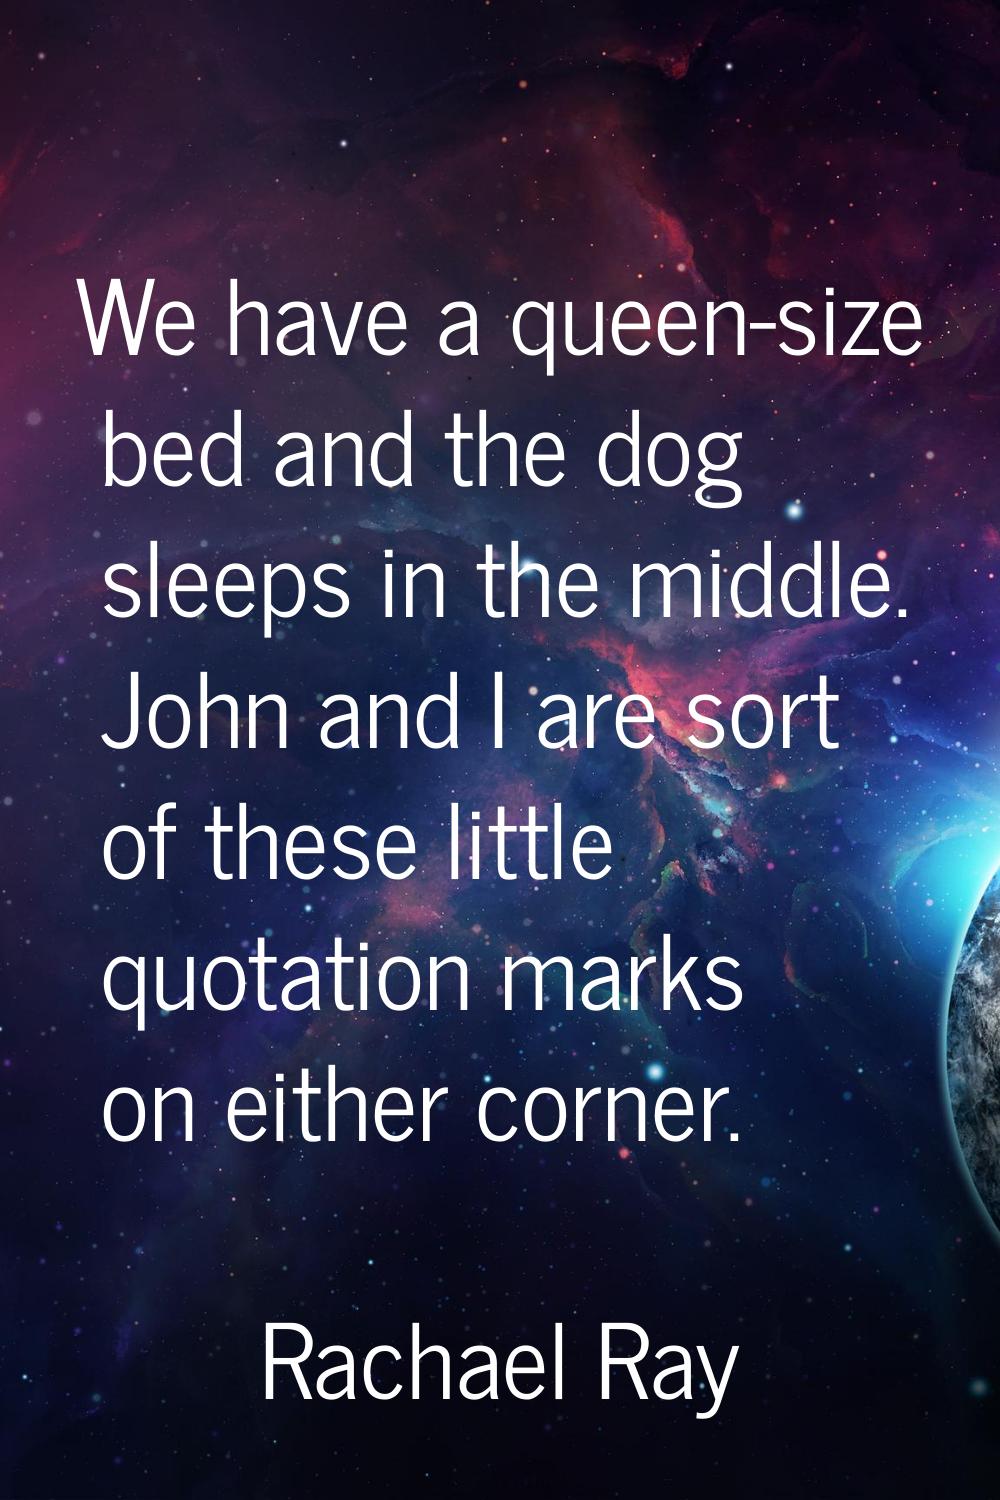 We have a queen-size bed and the dog sleeps in the middle. John and I are sort of these little quot